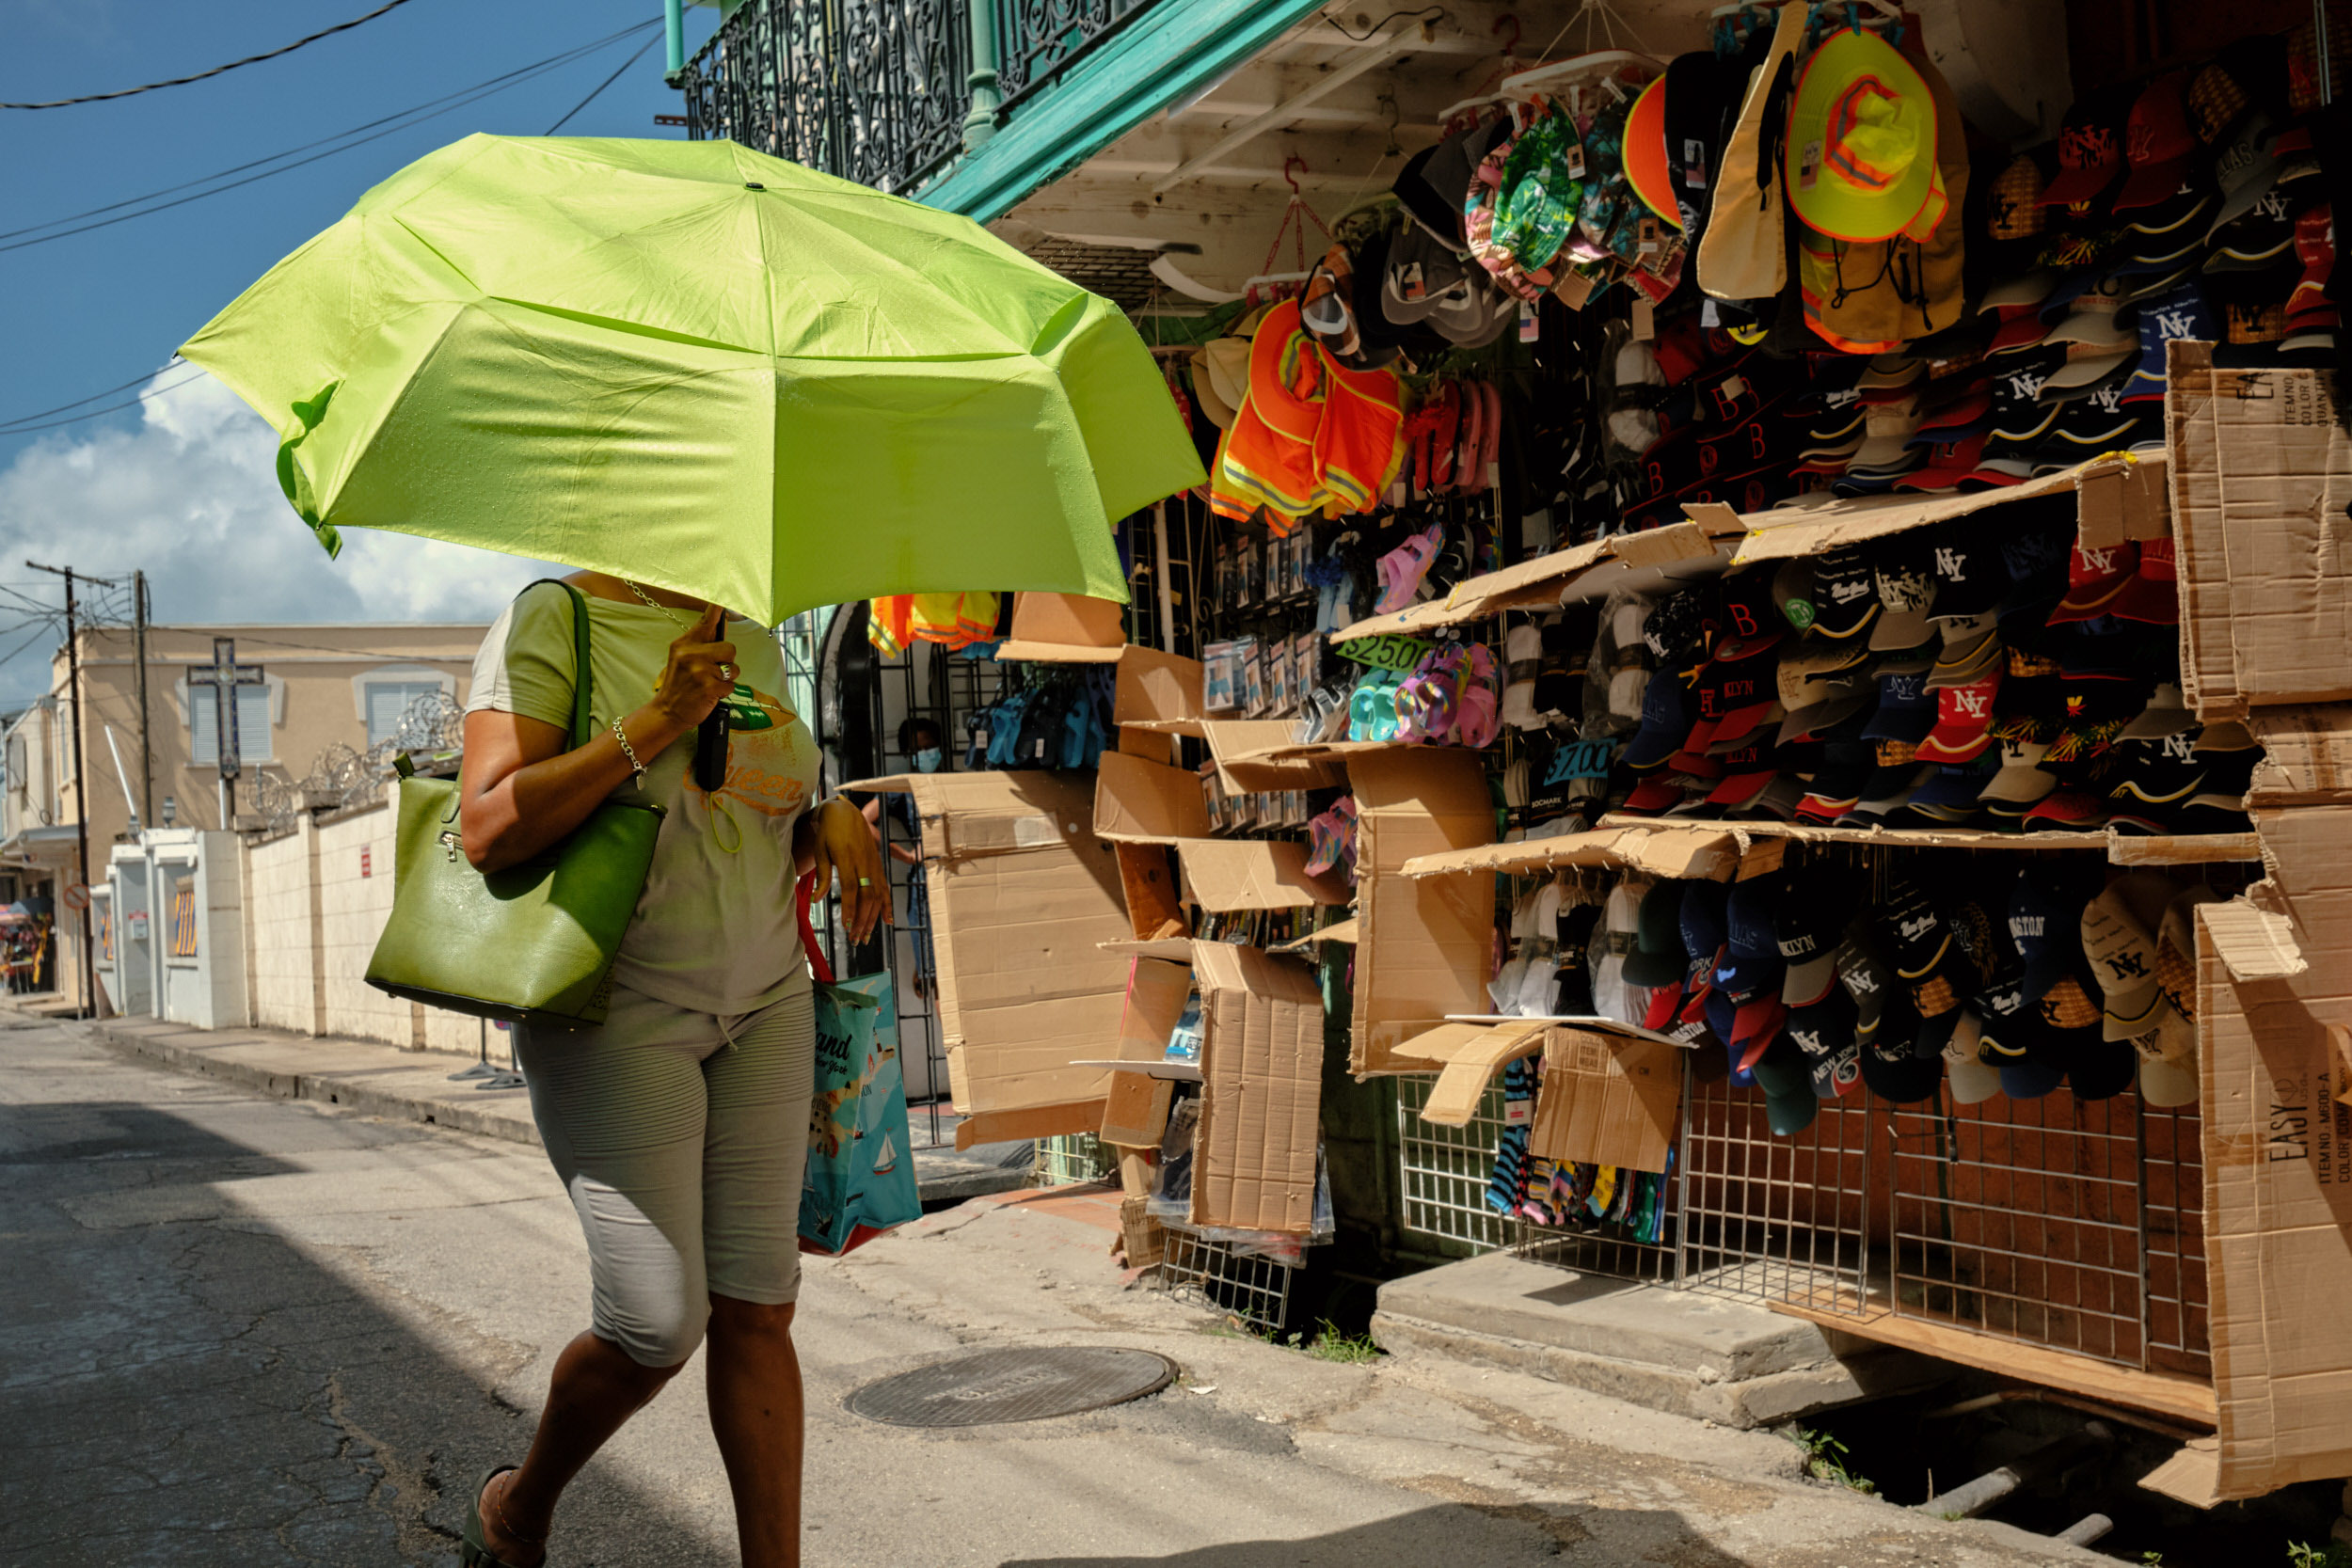 A WOMAN USES HER UMBRELLA TO SHELTER FROM THE HOT WEST INDIES SUN